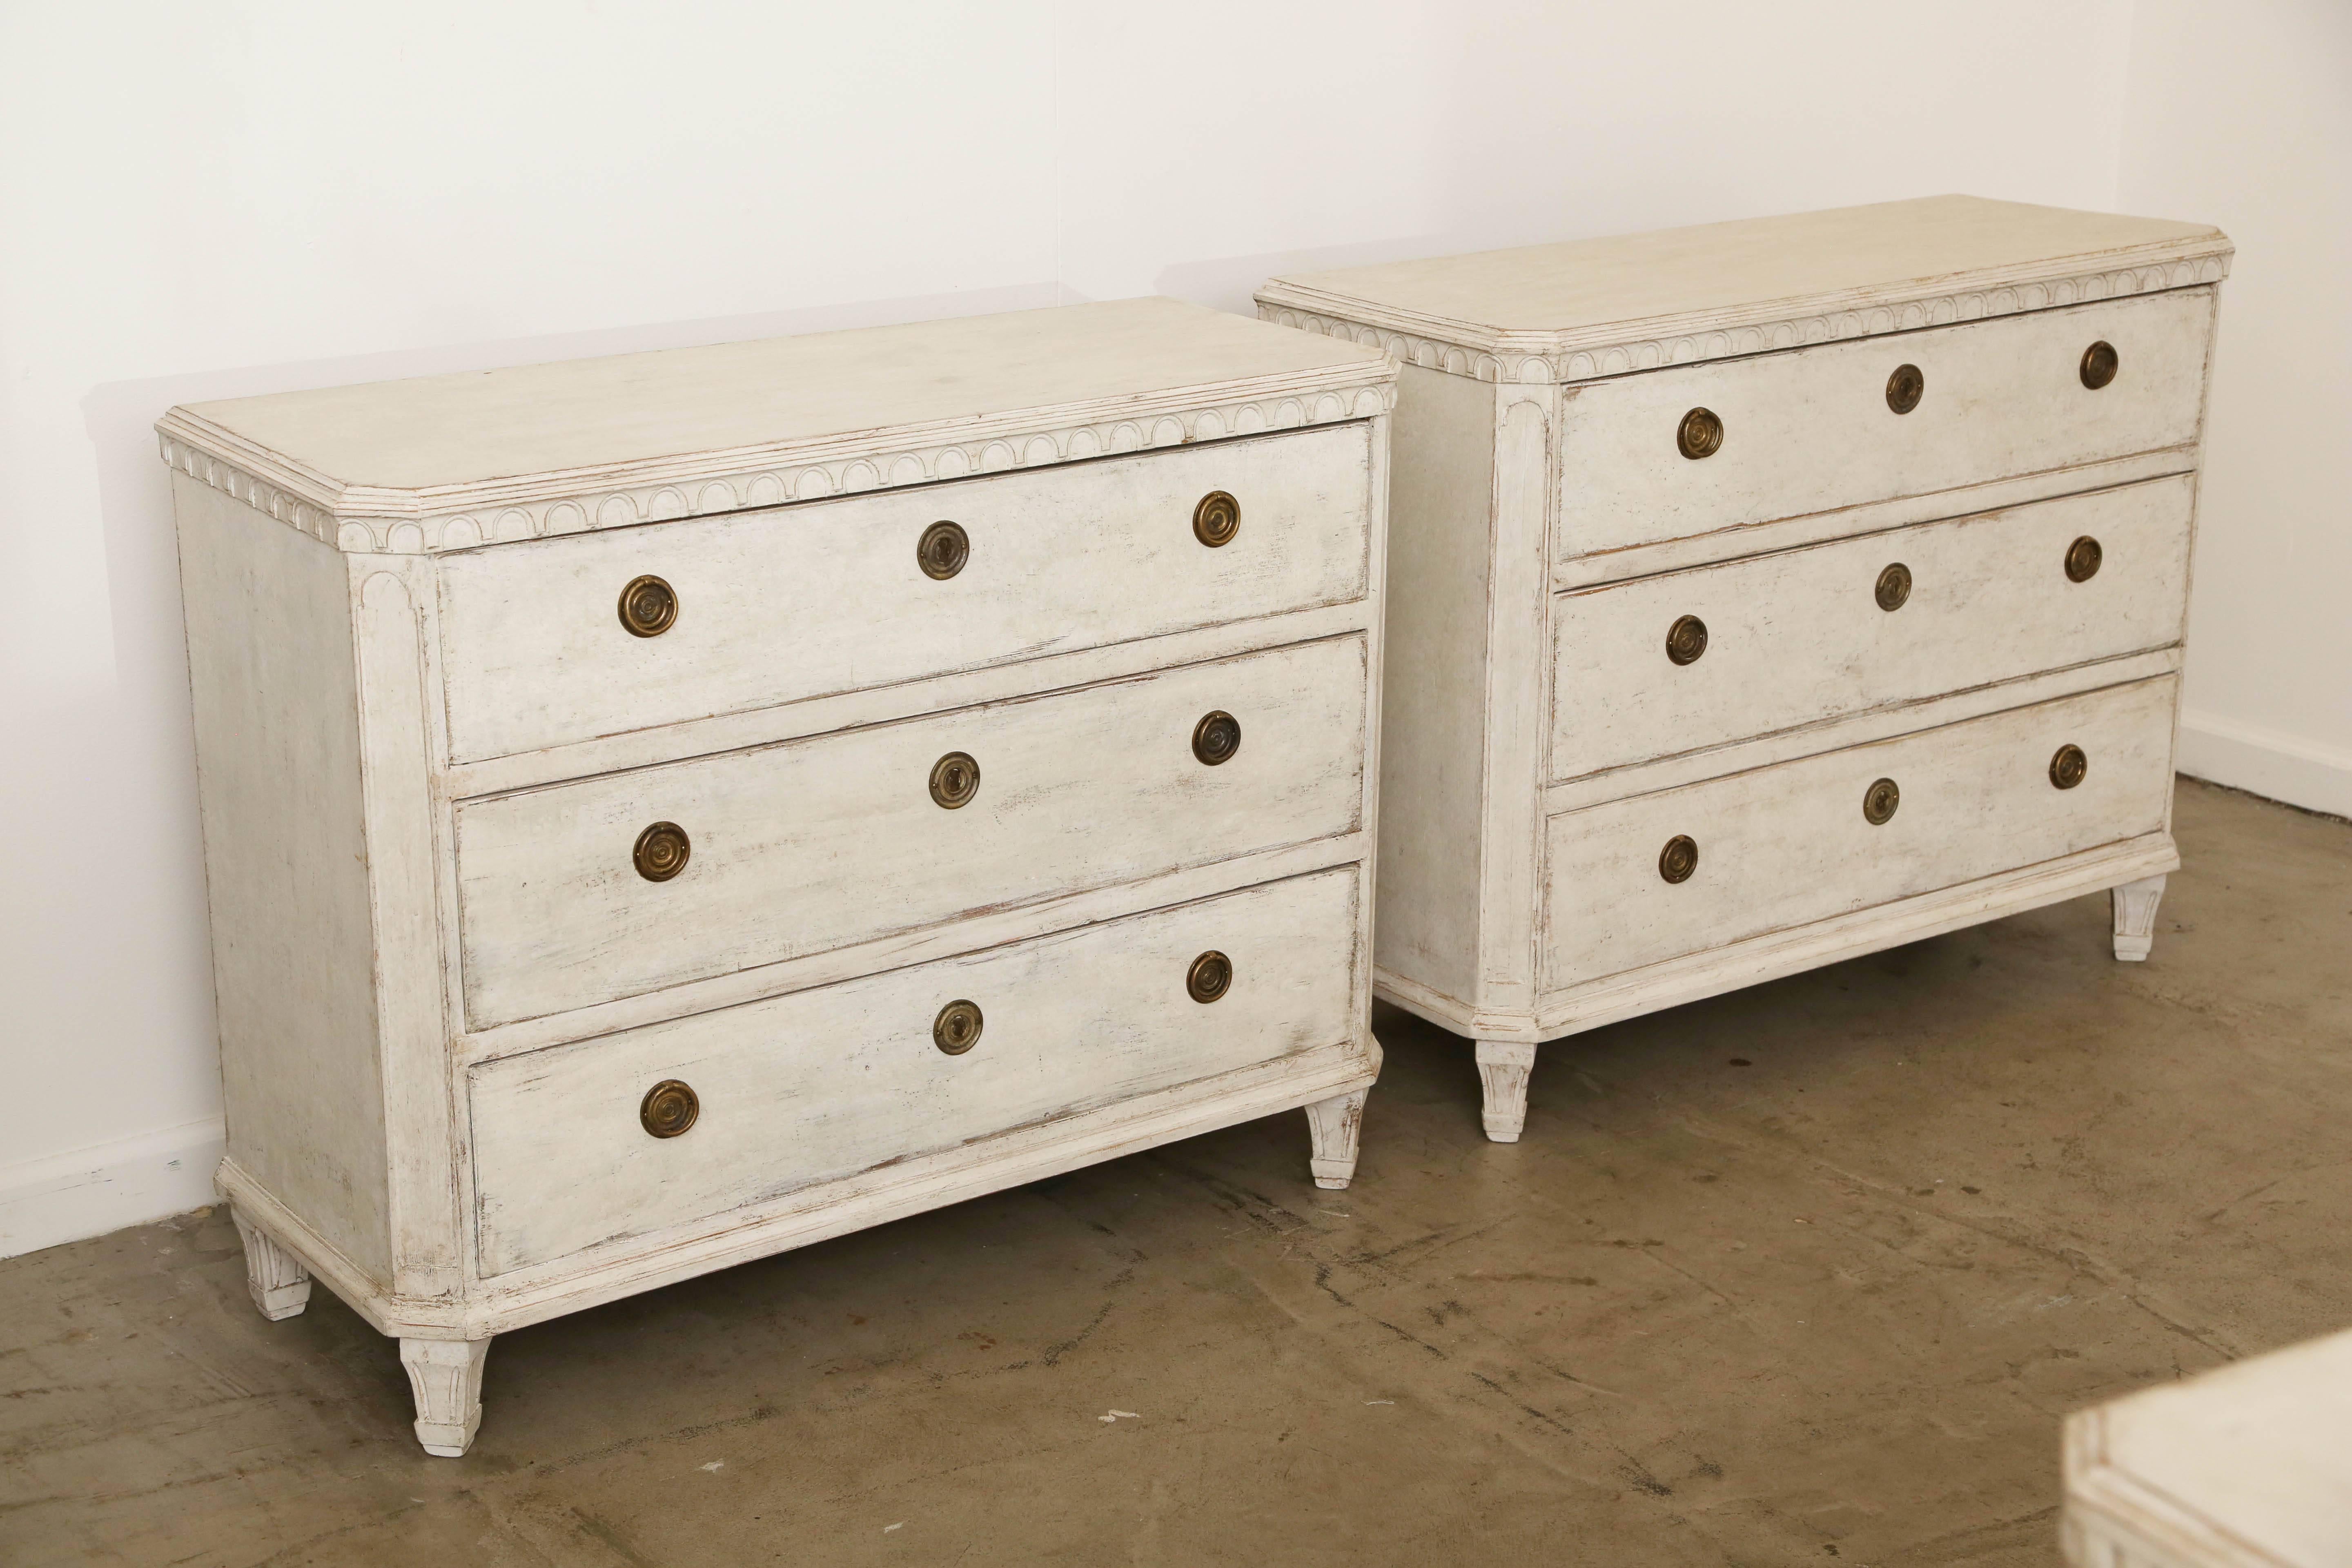 Pair of antique Swedish Gustavian style painted chests, late 19th century
Simple painted tops above a lovely crisp carved arched border, cut off corners with carved panels, Classic tapered fluted legs, three drawers. Painted in a
distressed Swedish